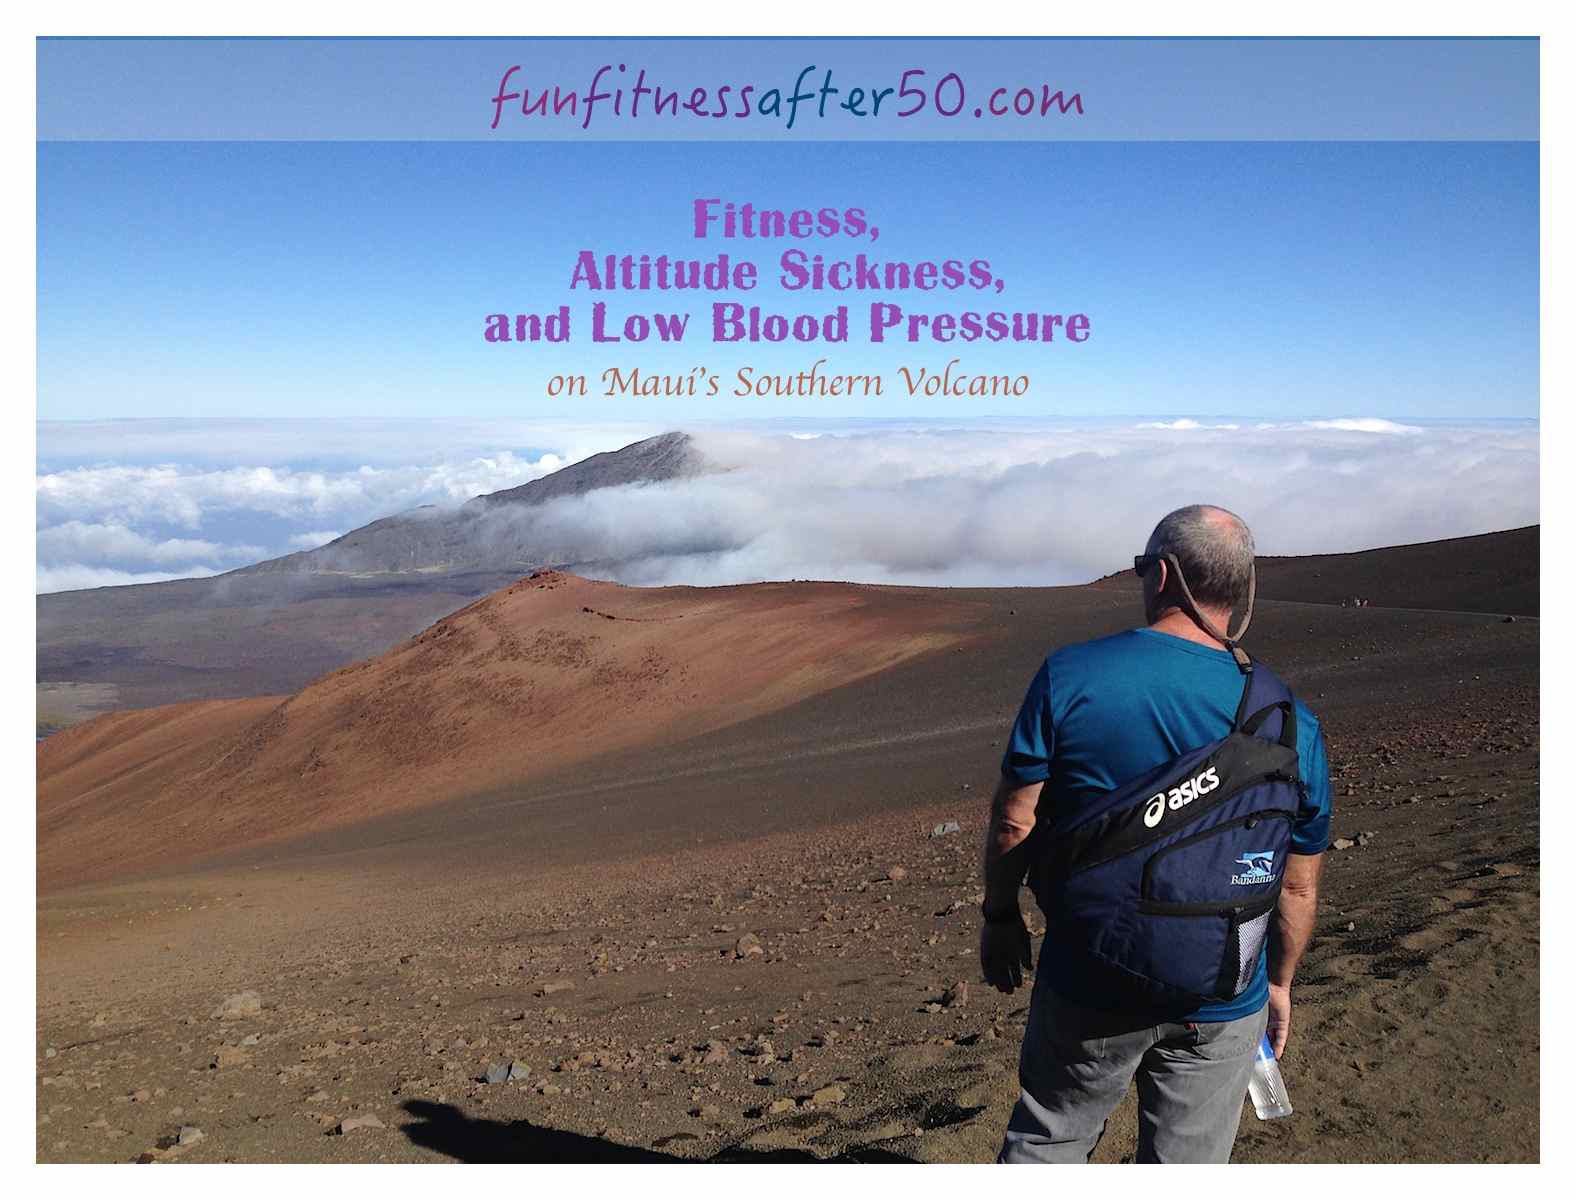 Fitness, Altitude Sickness, and Low Blood Pressure on Maui's Southern